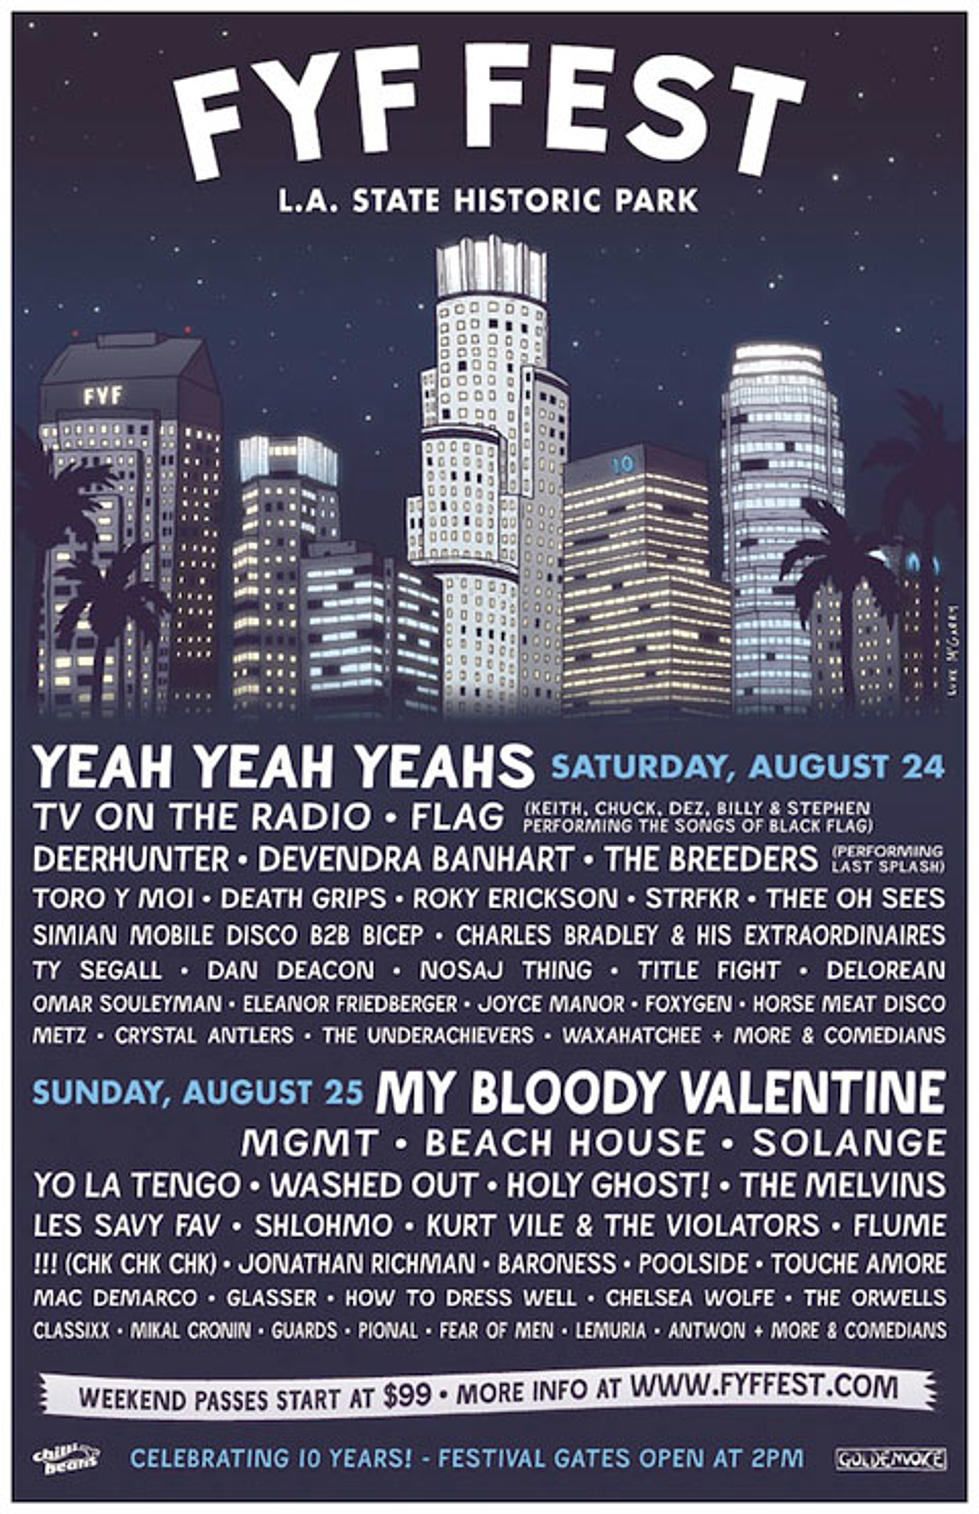 FYF Fest Lineup Bloody Valentine included)